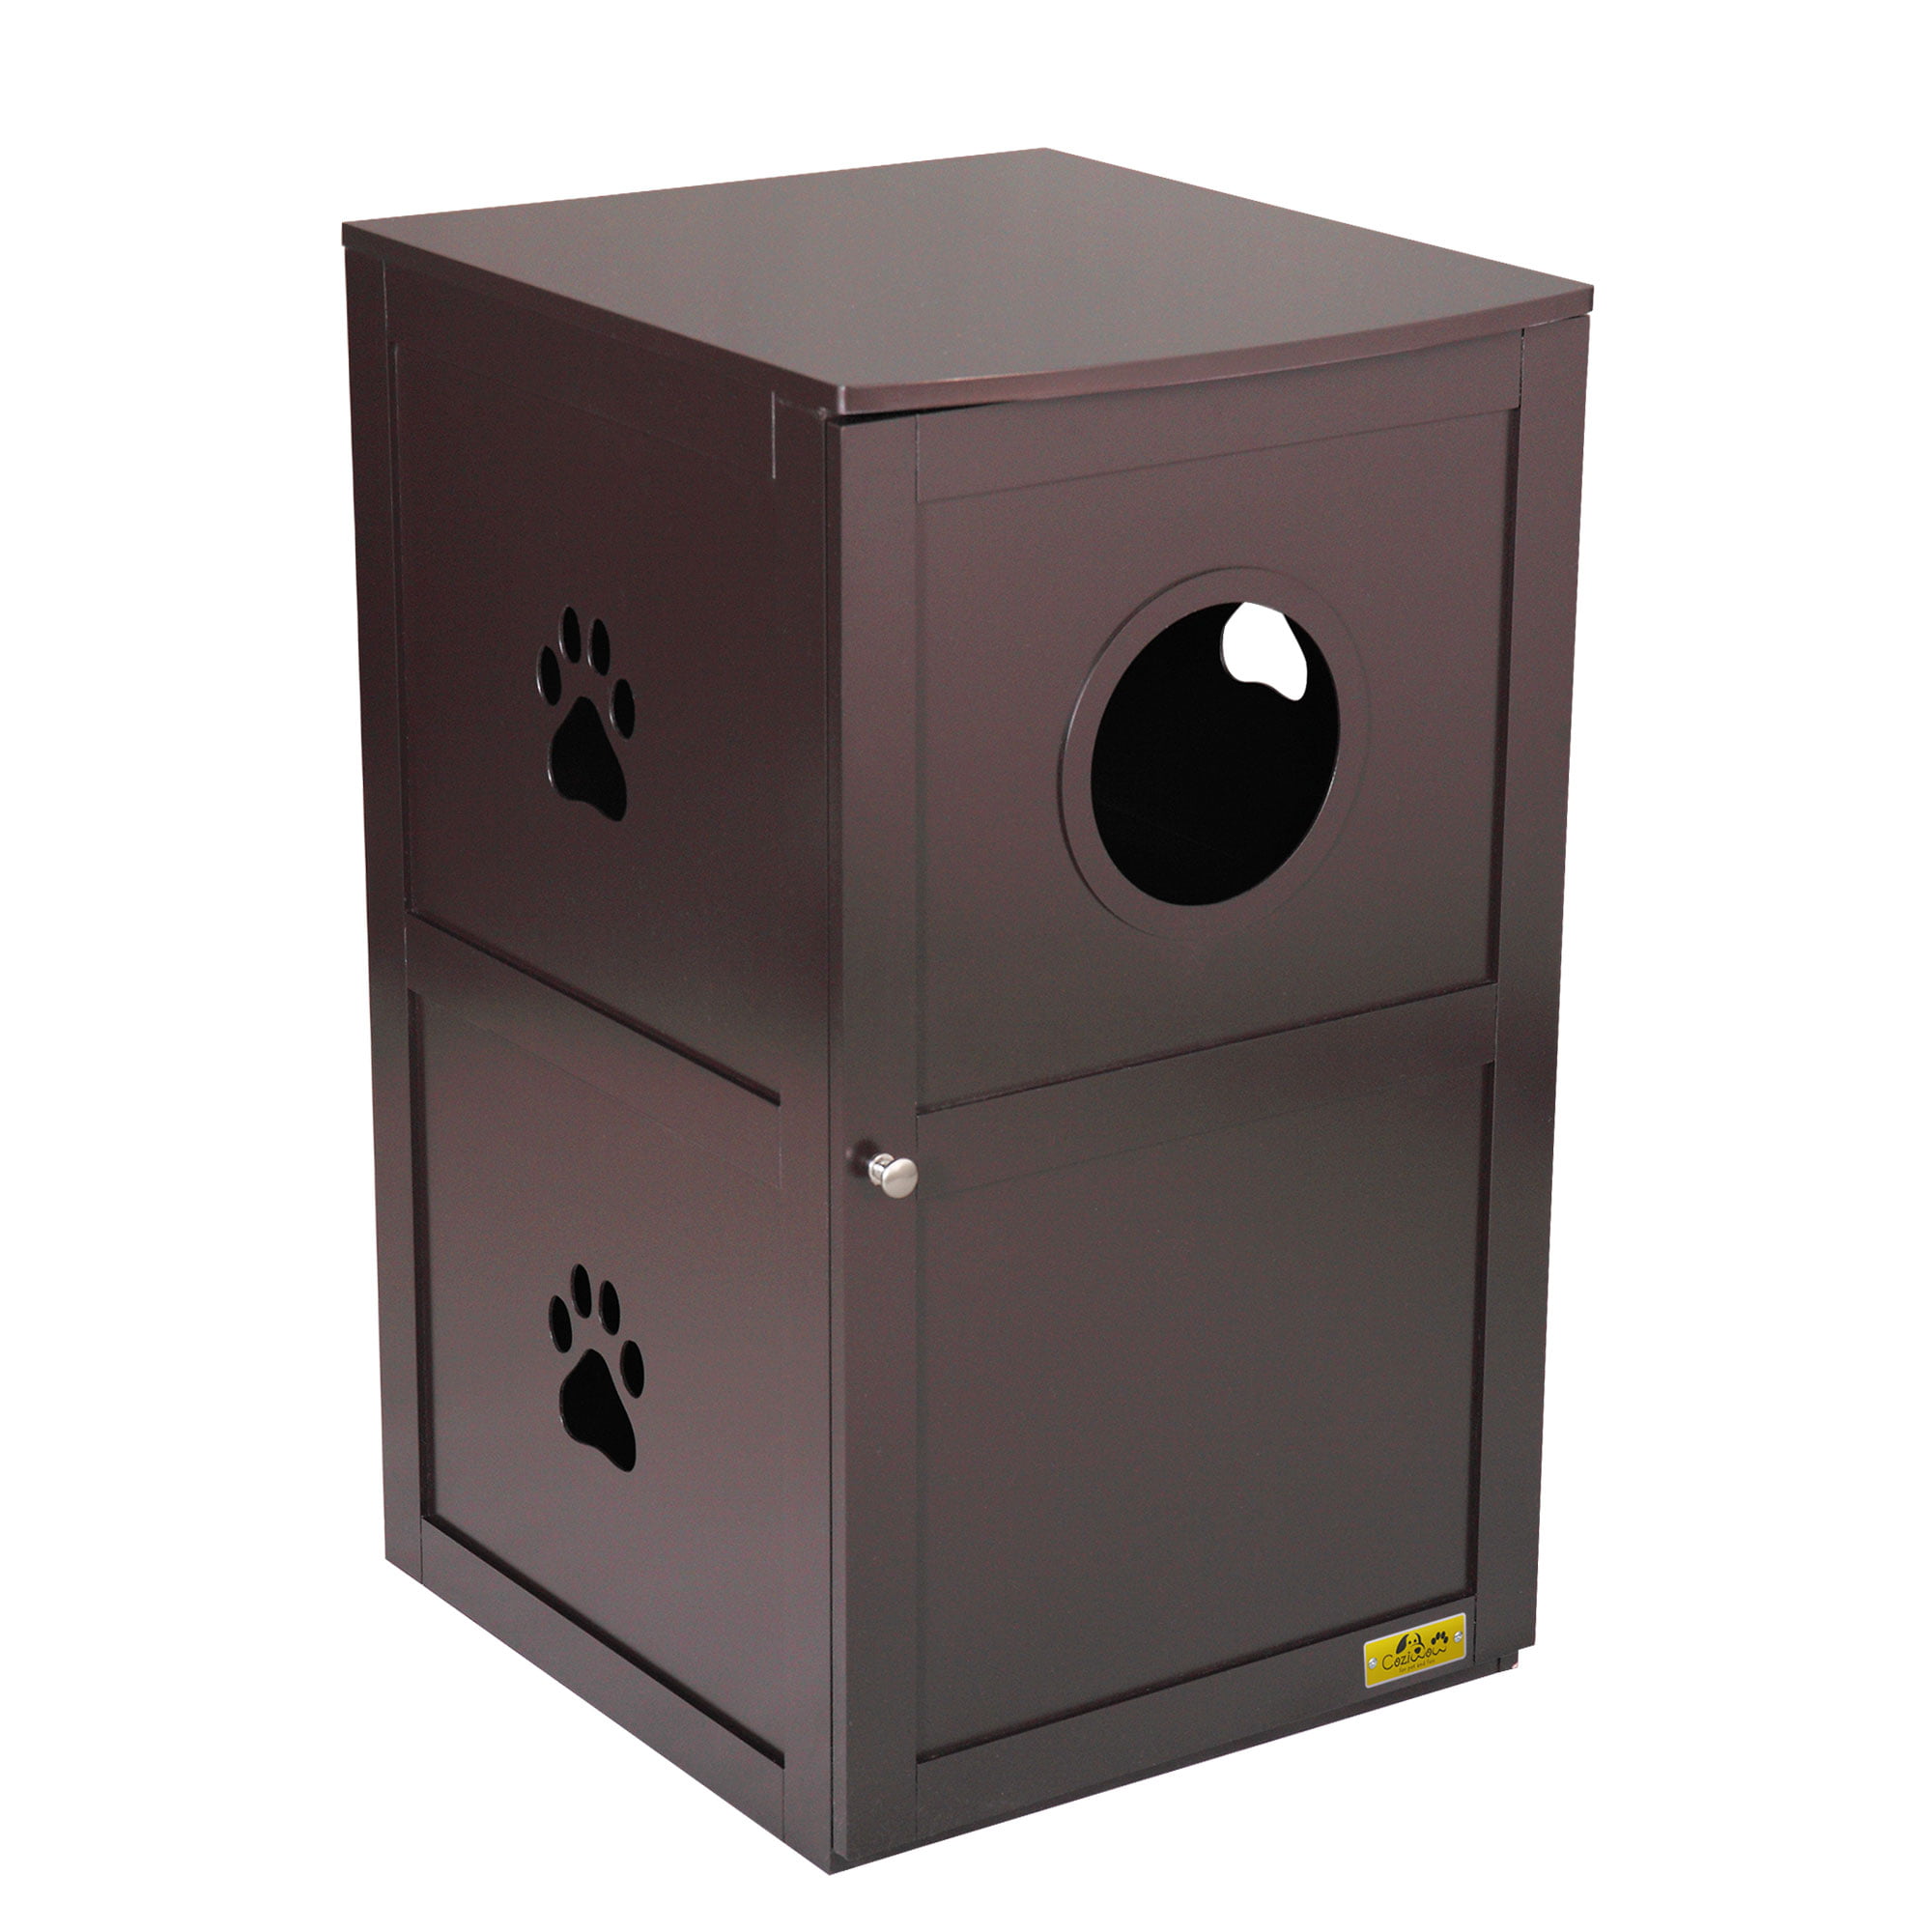 2-Tier Functional Wood Cat Washroom Litter Box Cover with Multiple Vents a Round Entrance and Openable Door